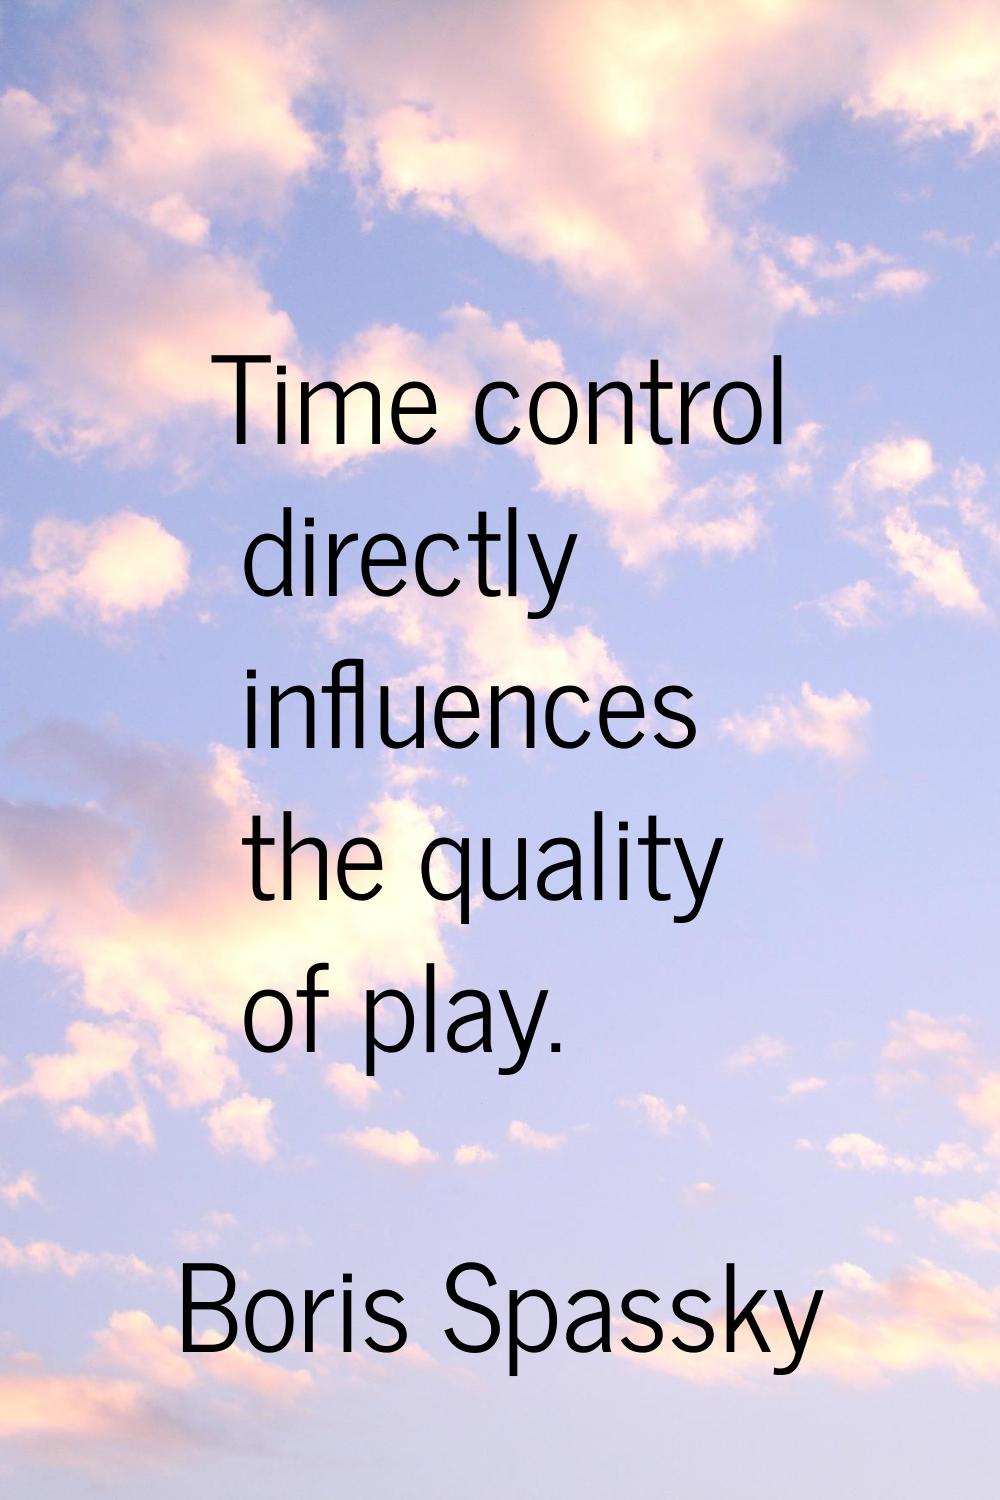 Time control directly influences the quality of play.